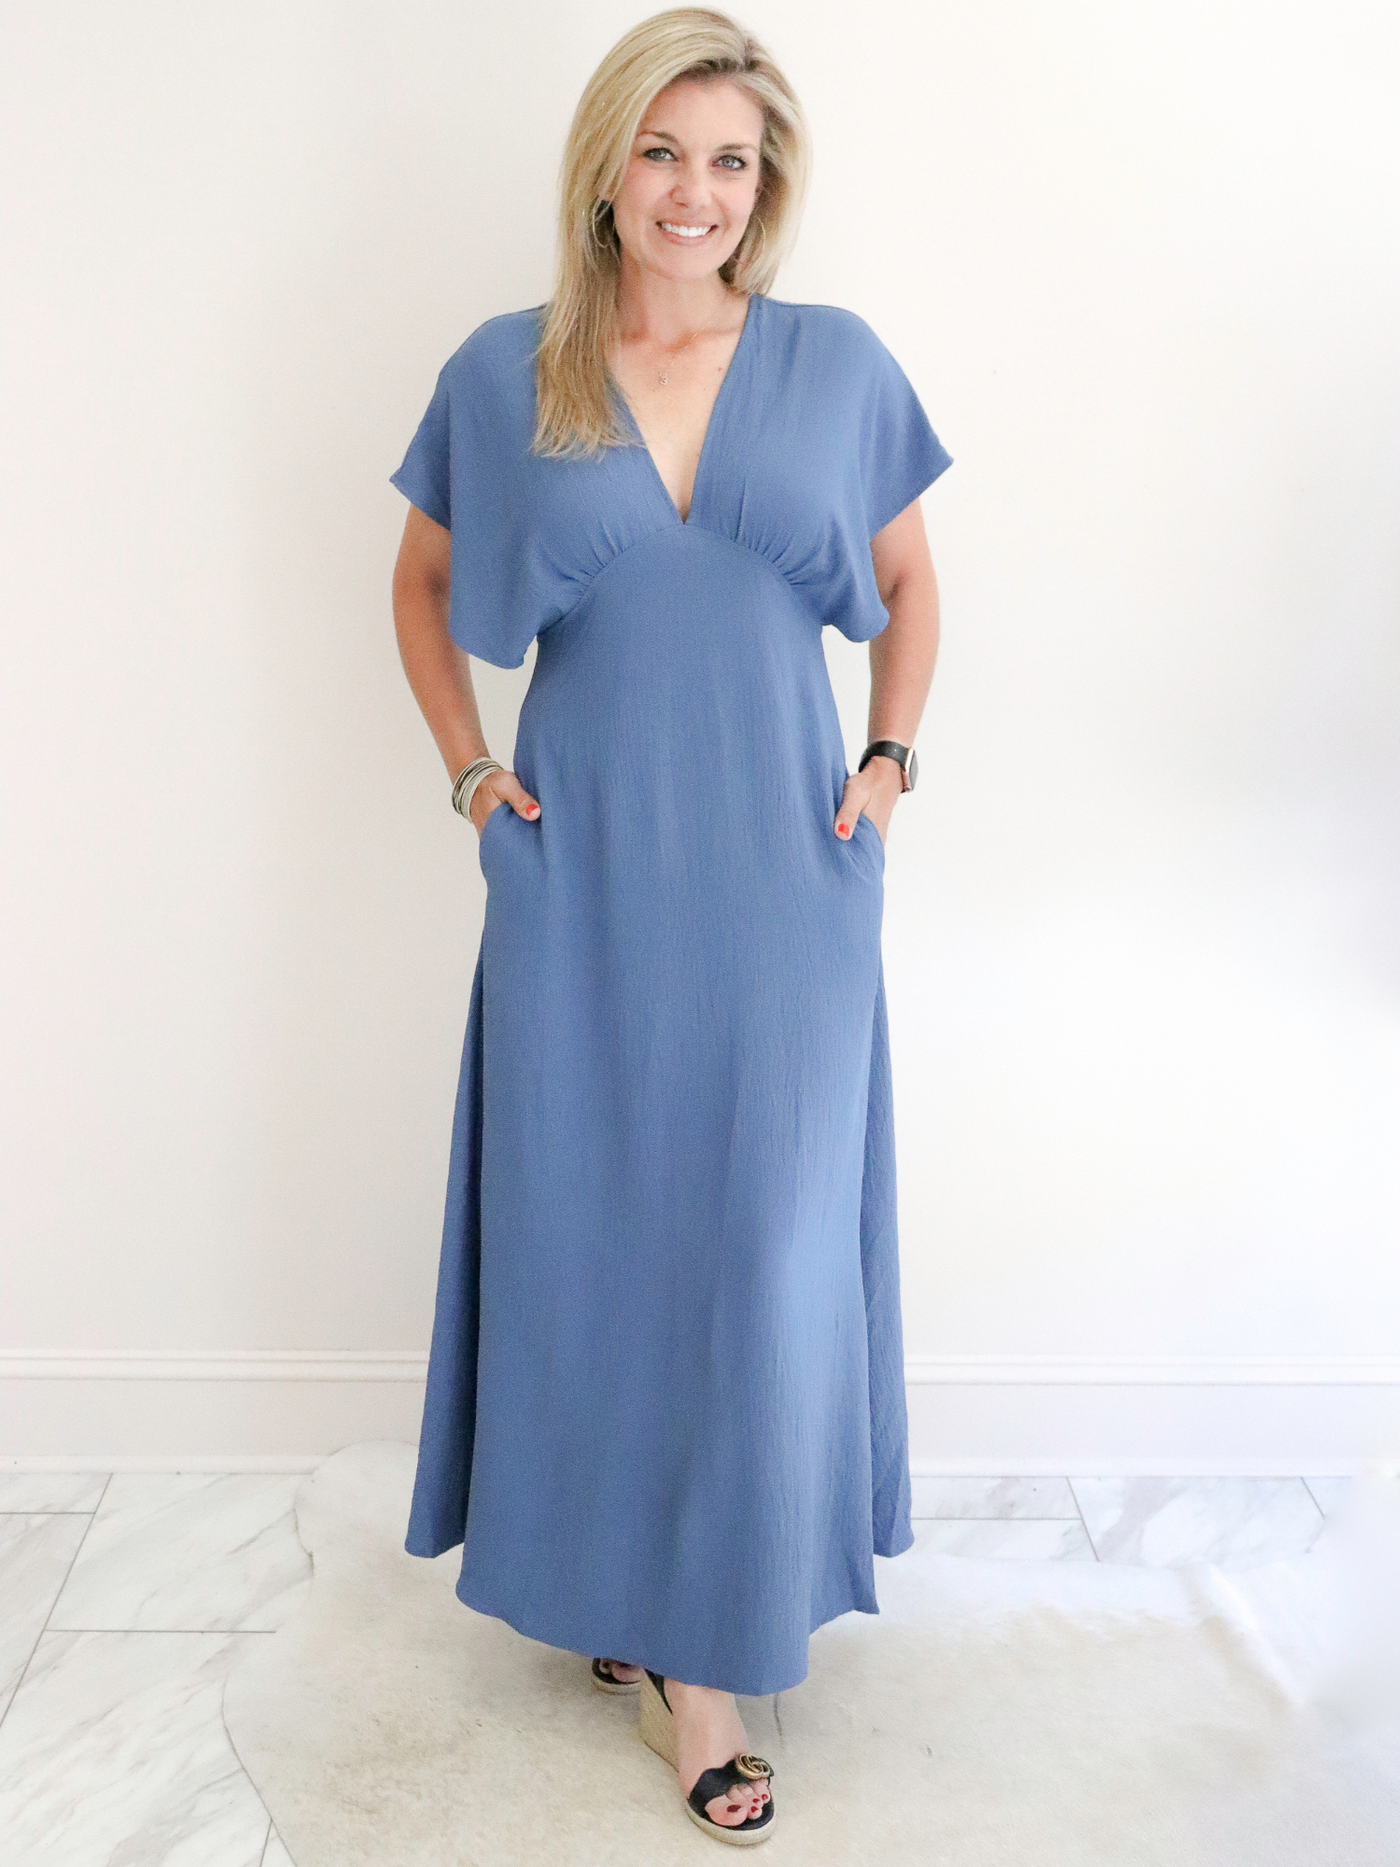 Blue Woven Maxi Dress by Molly Bracken front view.